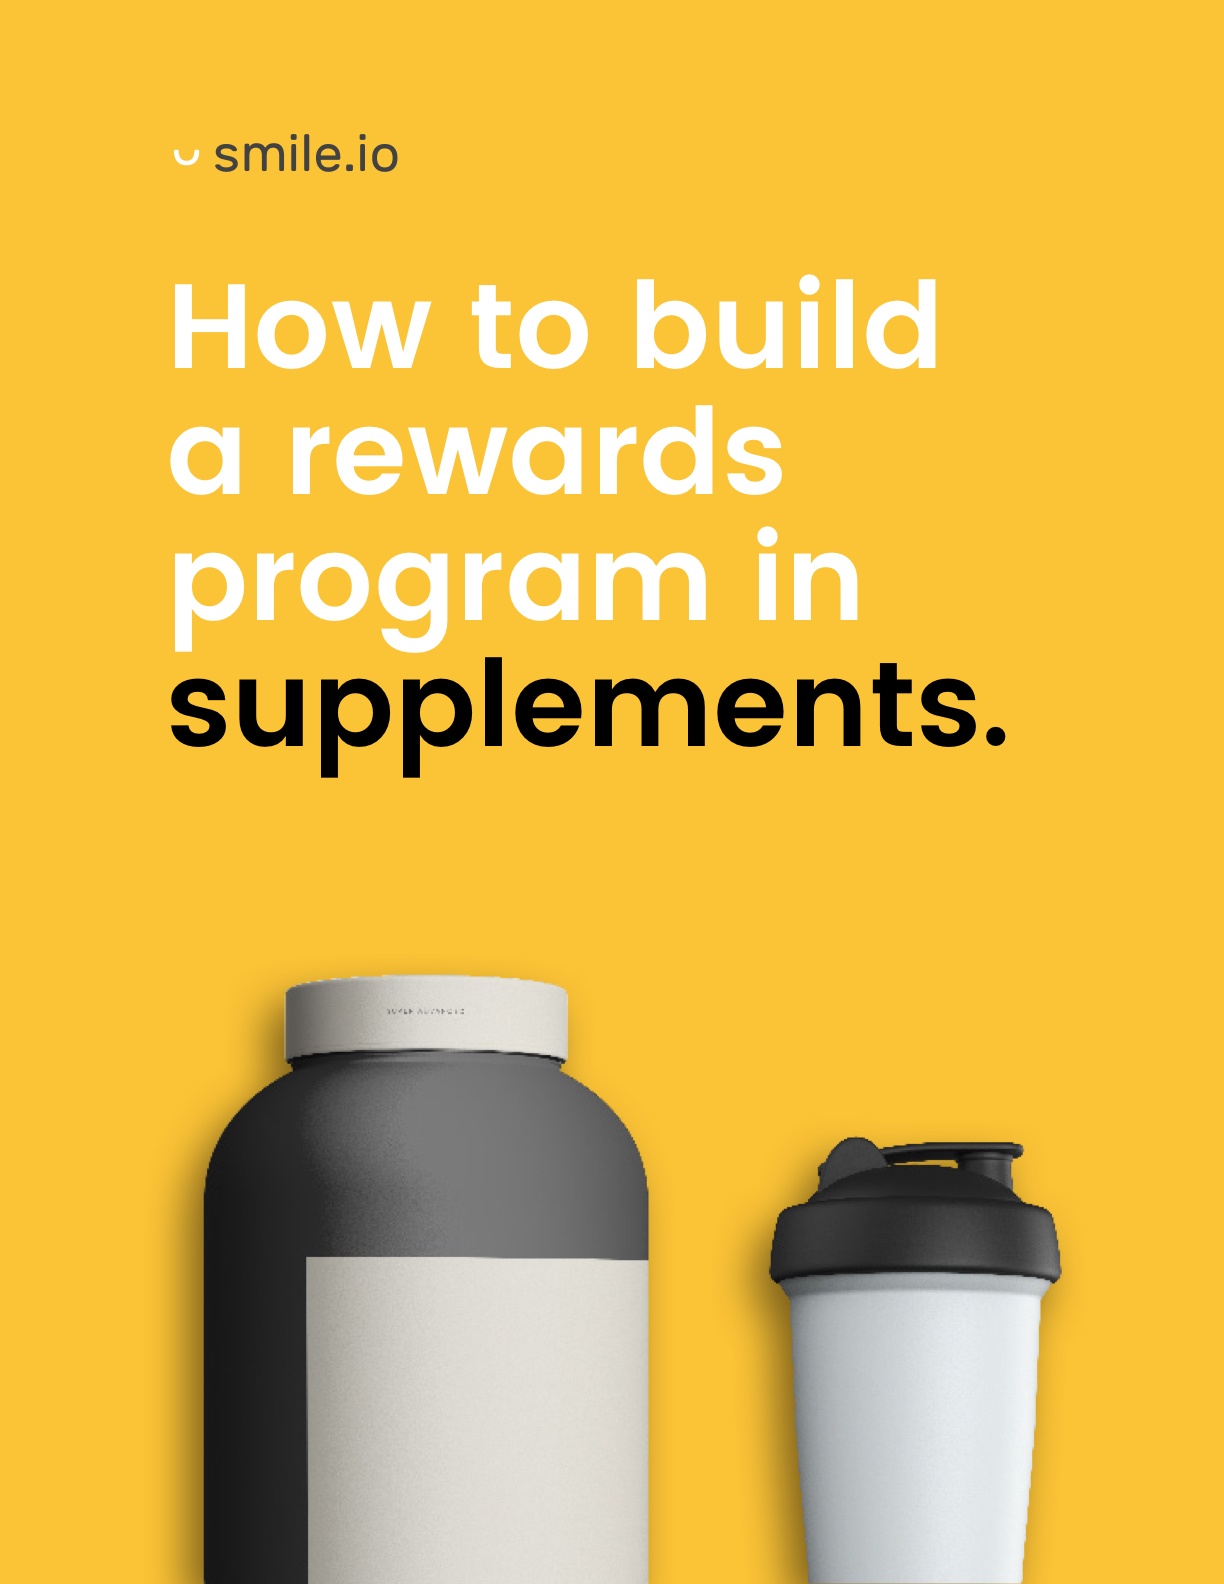 How to Build a Rewards Program in Supplements